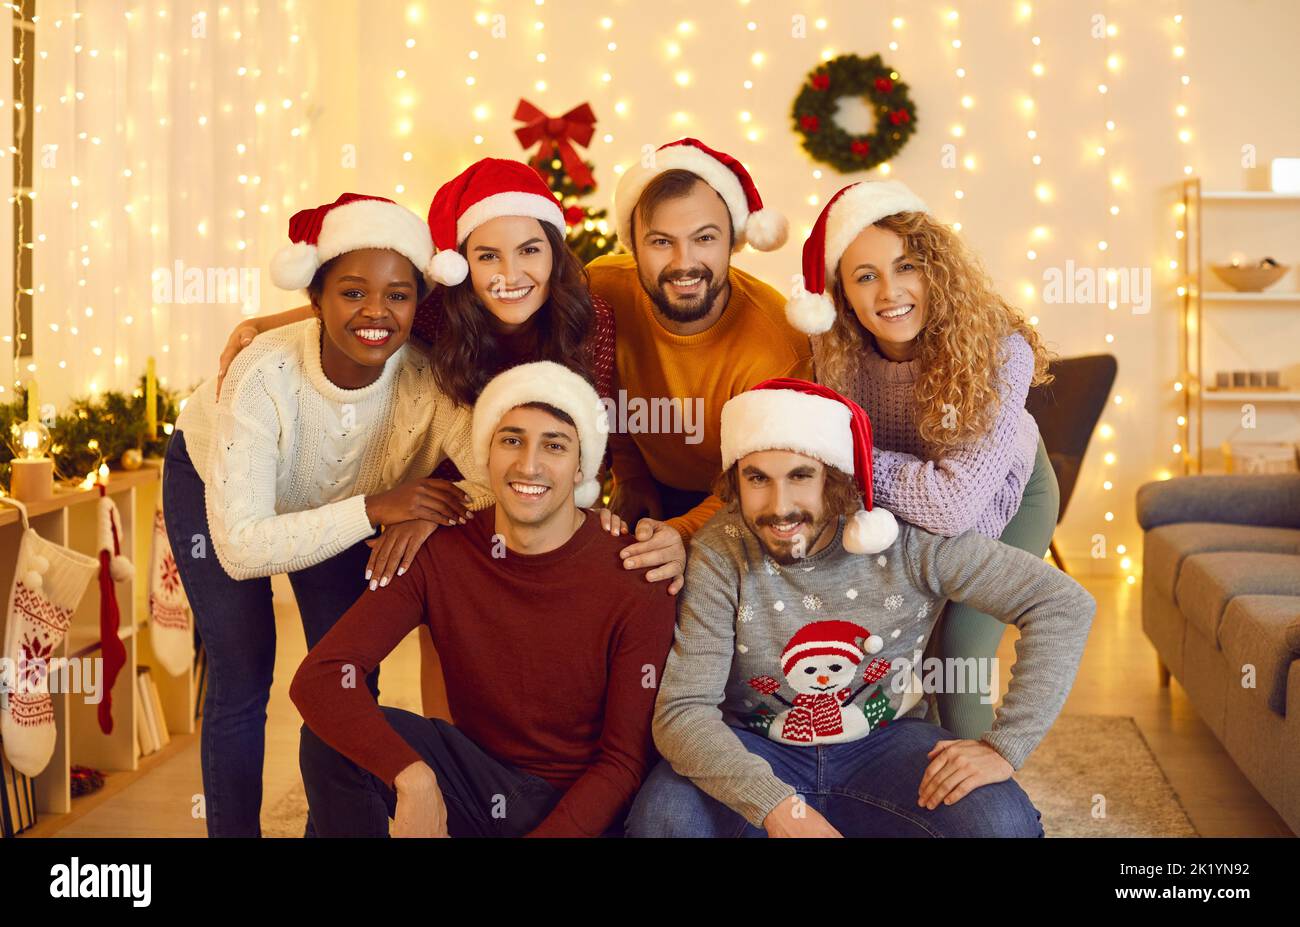 Portrait of cheerful young friends in Santa hats posing in cozy living room with Christmas decor. Stock Photo